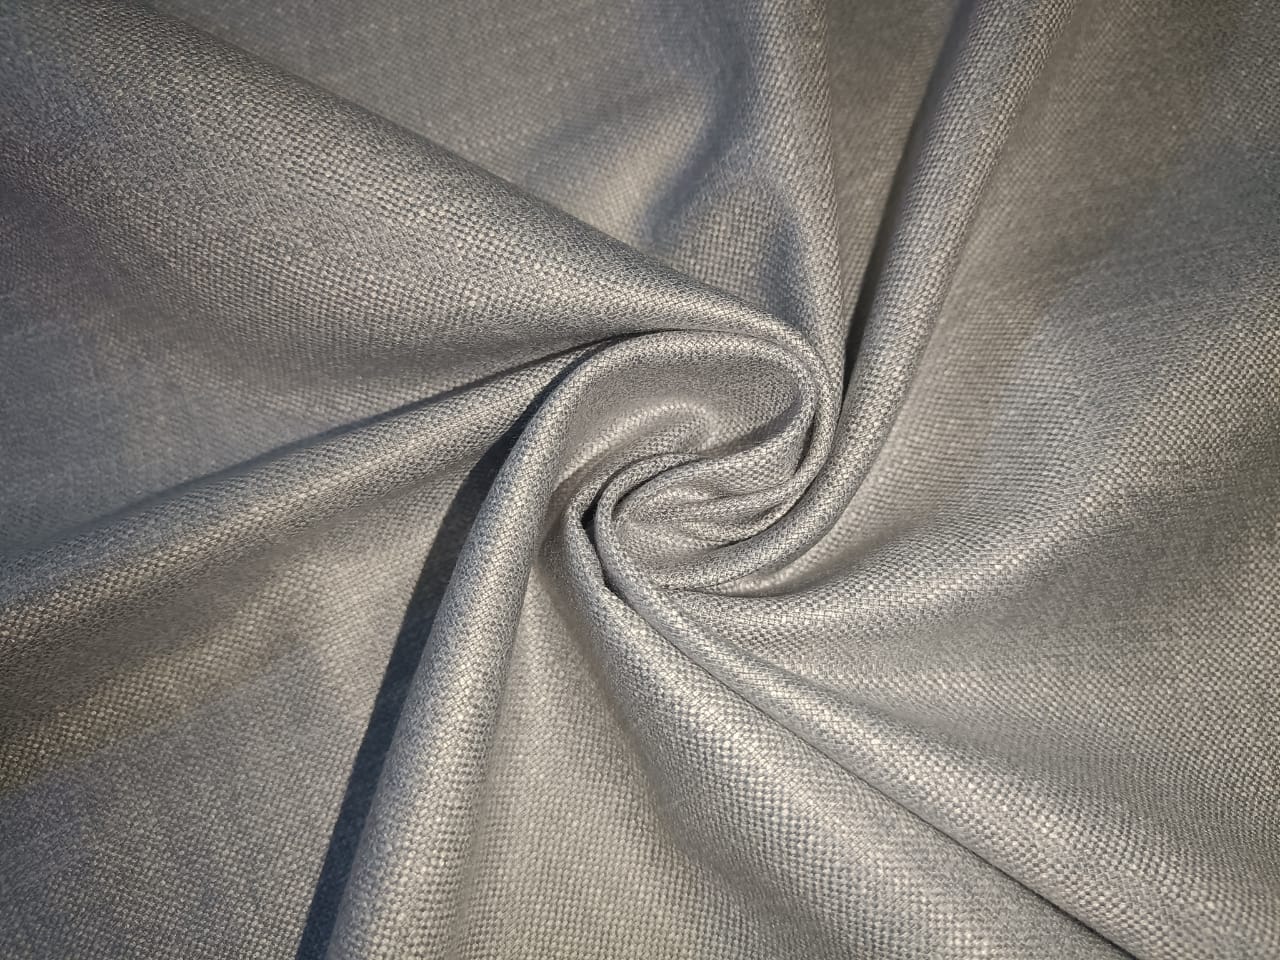 Huddersfield Bamboo suiting fabric made from 100% bamboo fiber 60" wide [14065/15581/15583]available in 3 colors white and black/blue and grey/white